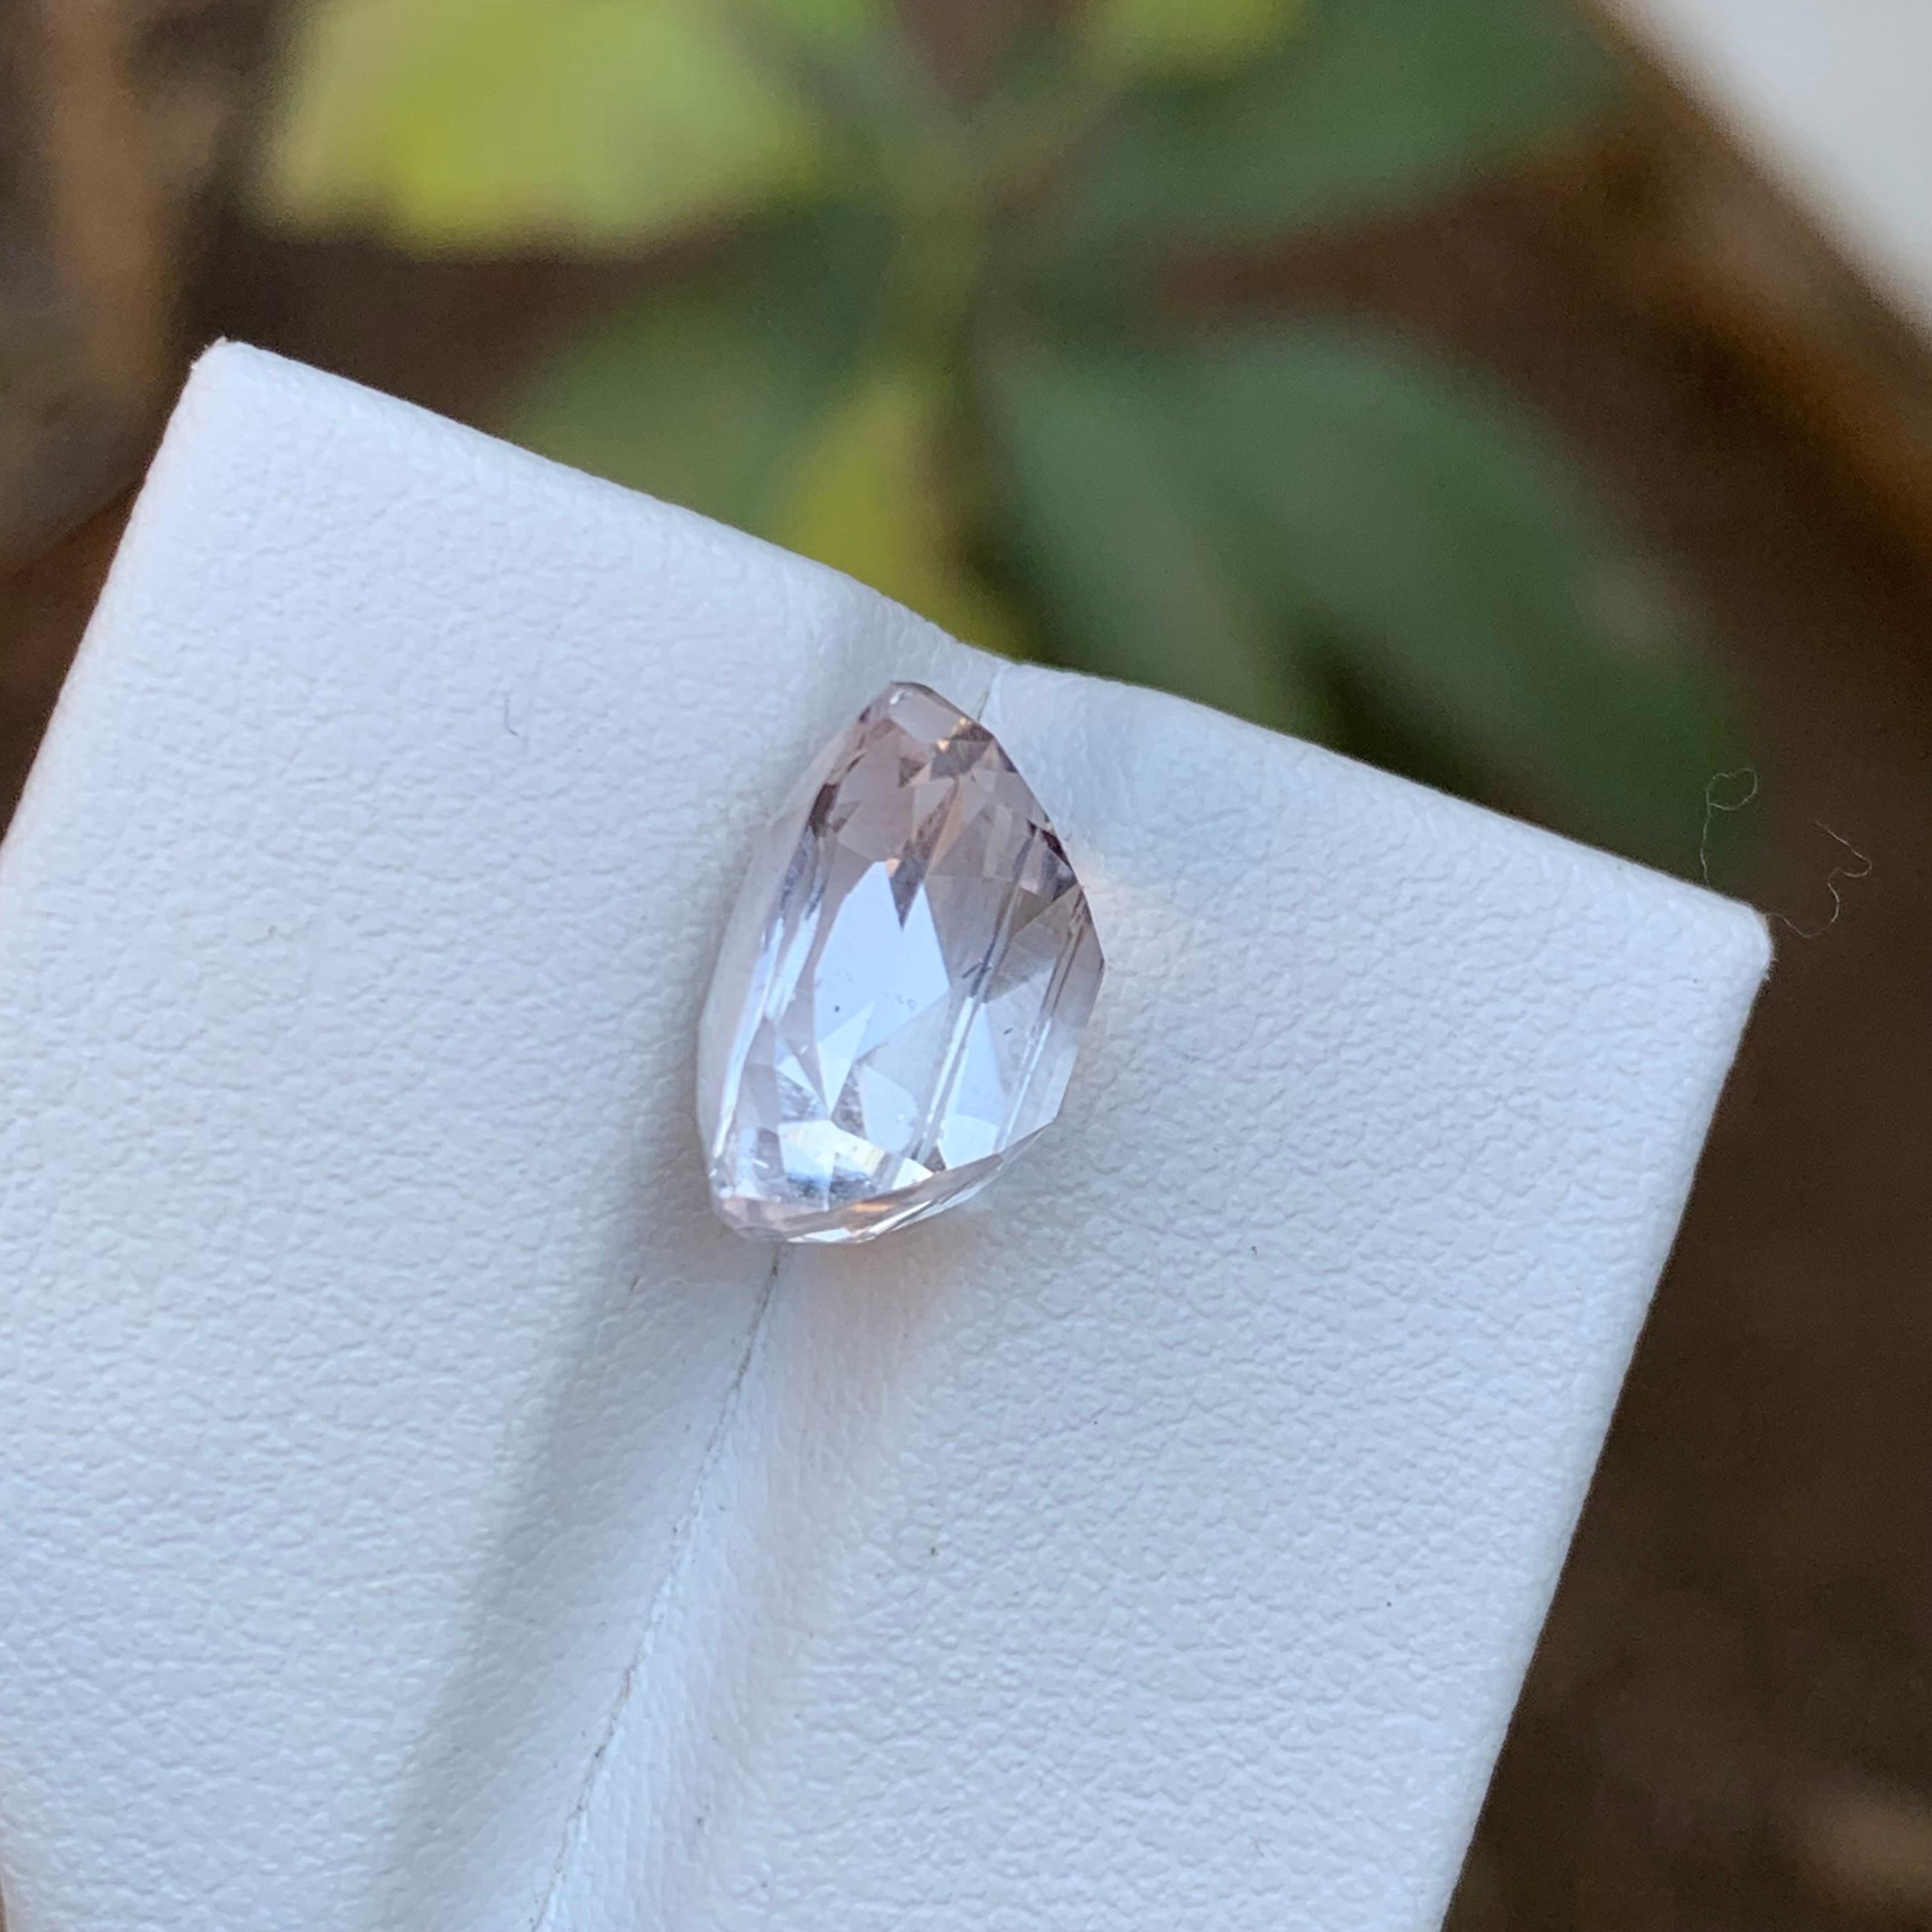 Rare White Natural Morganite Gemstone, 6.10 Ct Cushion Cut for Ring/Pendant Afg For Sale 4